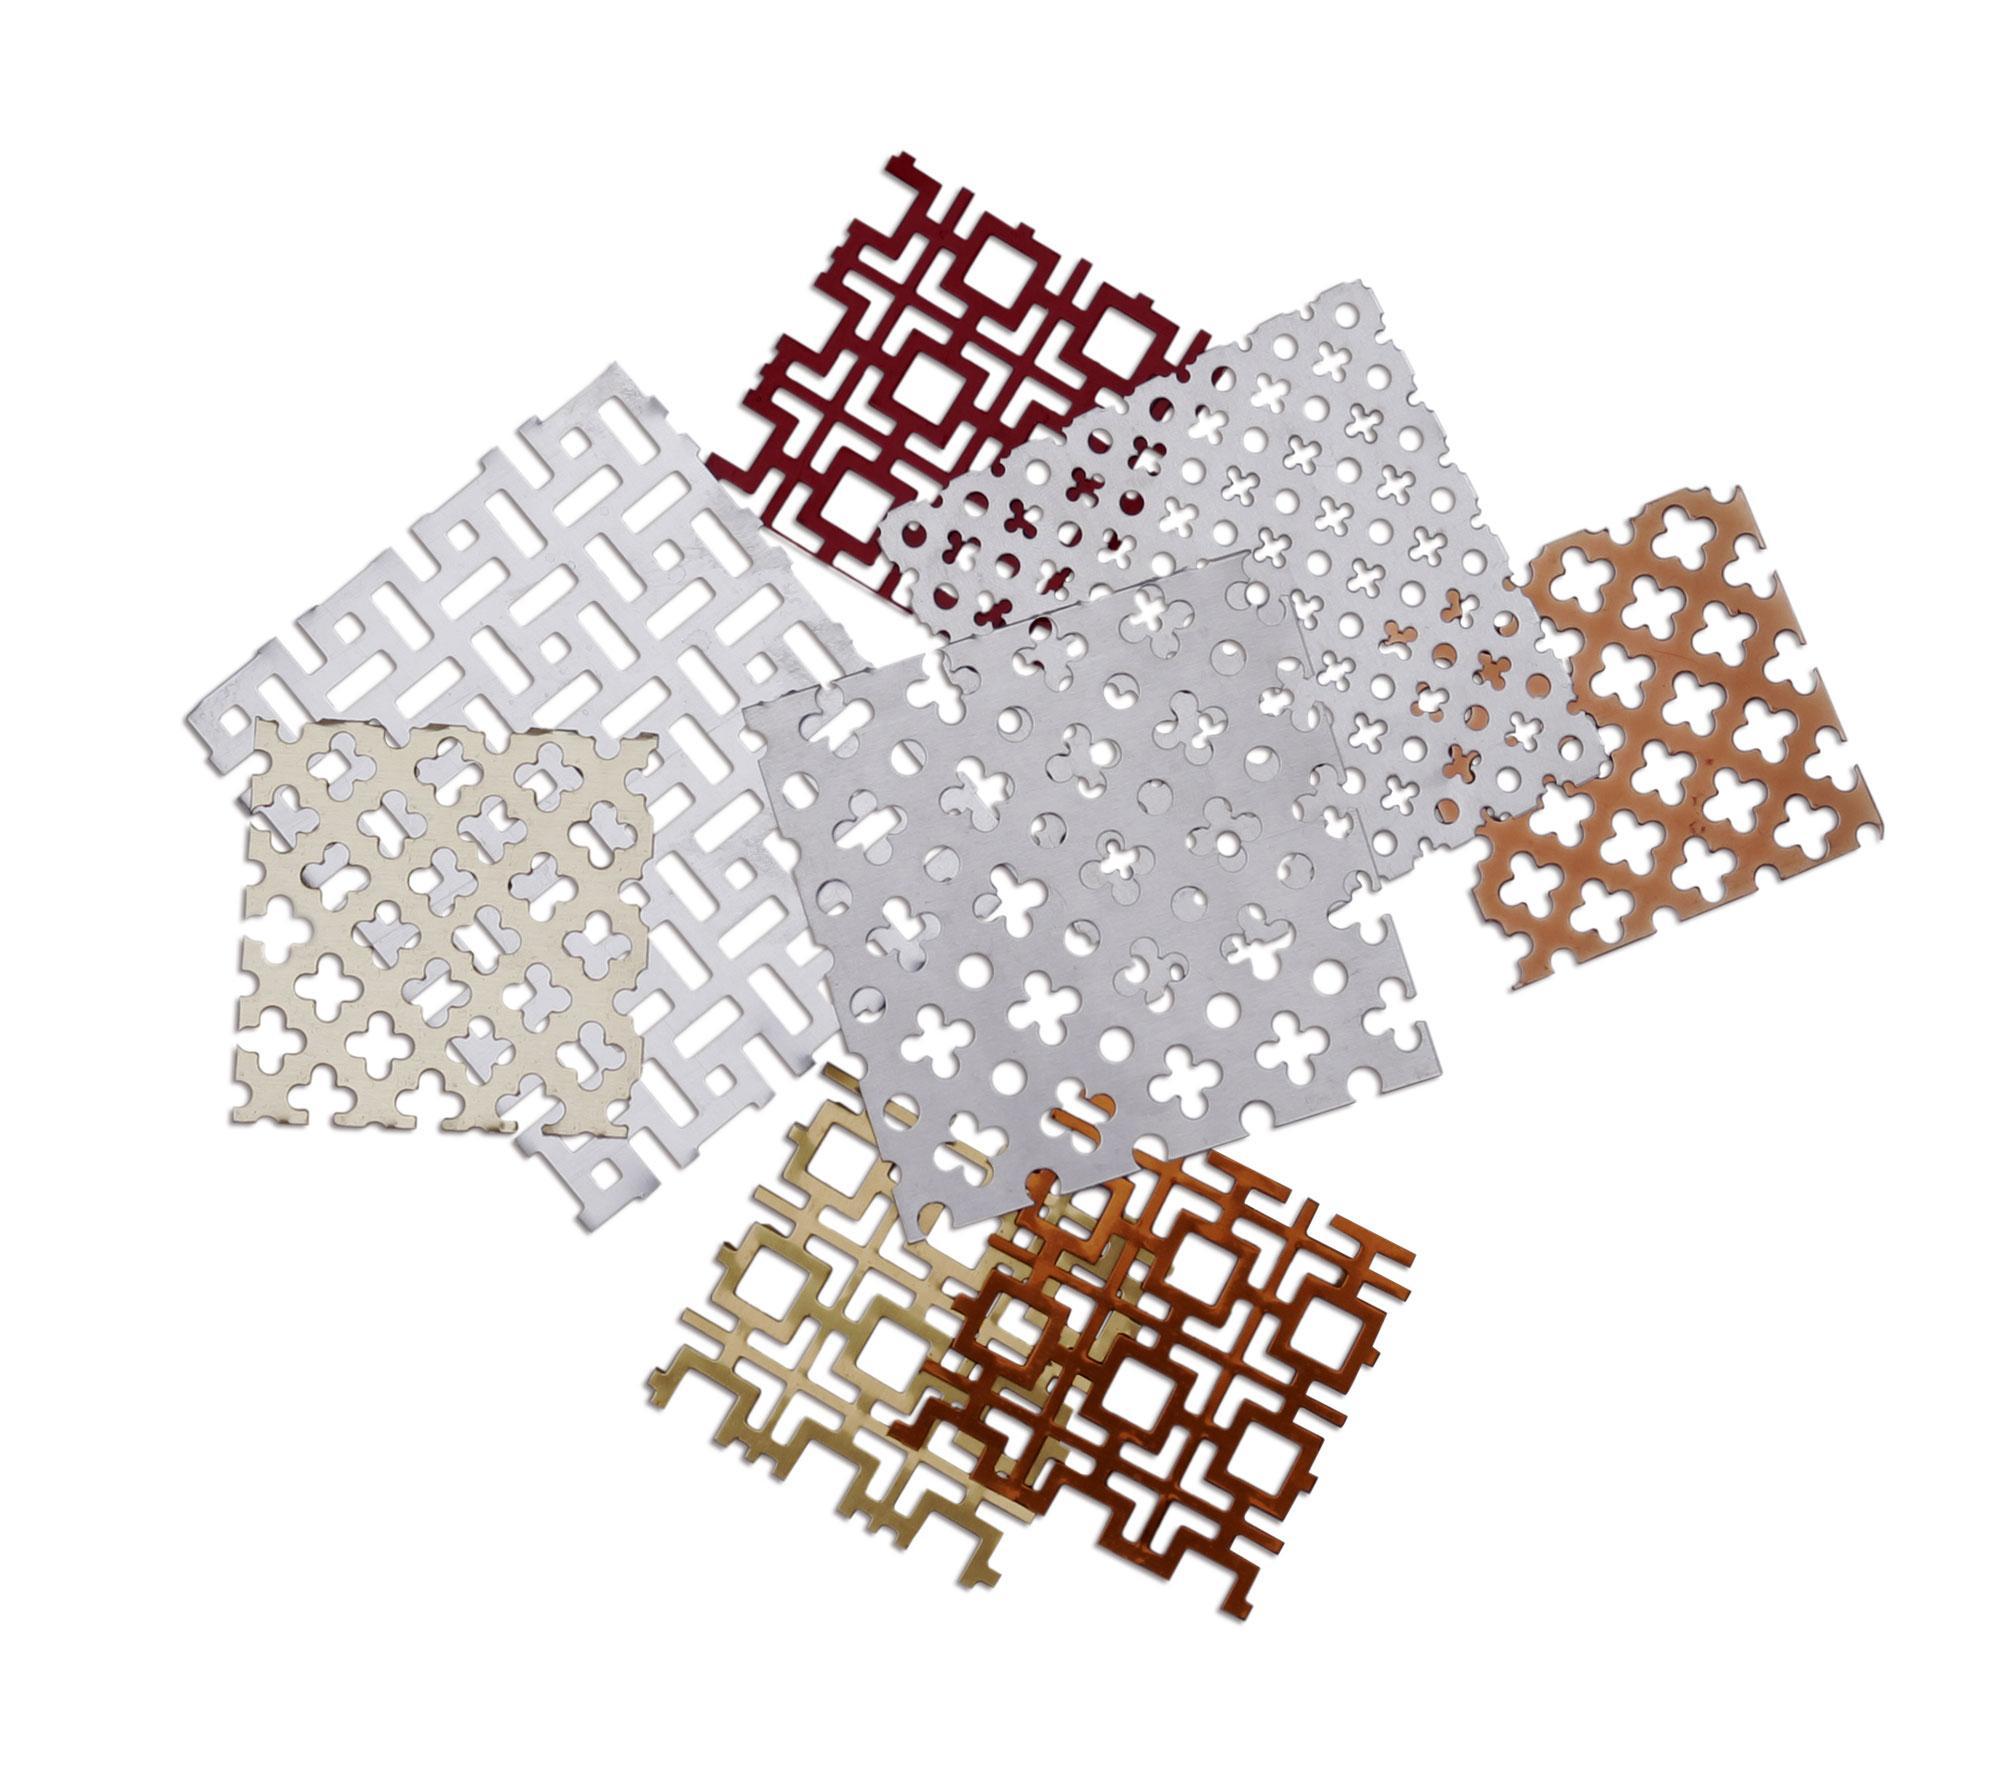 Products - Perforated Sheets - Decorative Patterns - L.P.S. ...